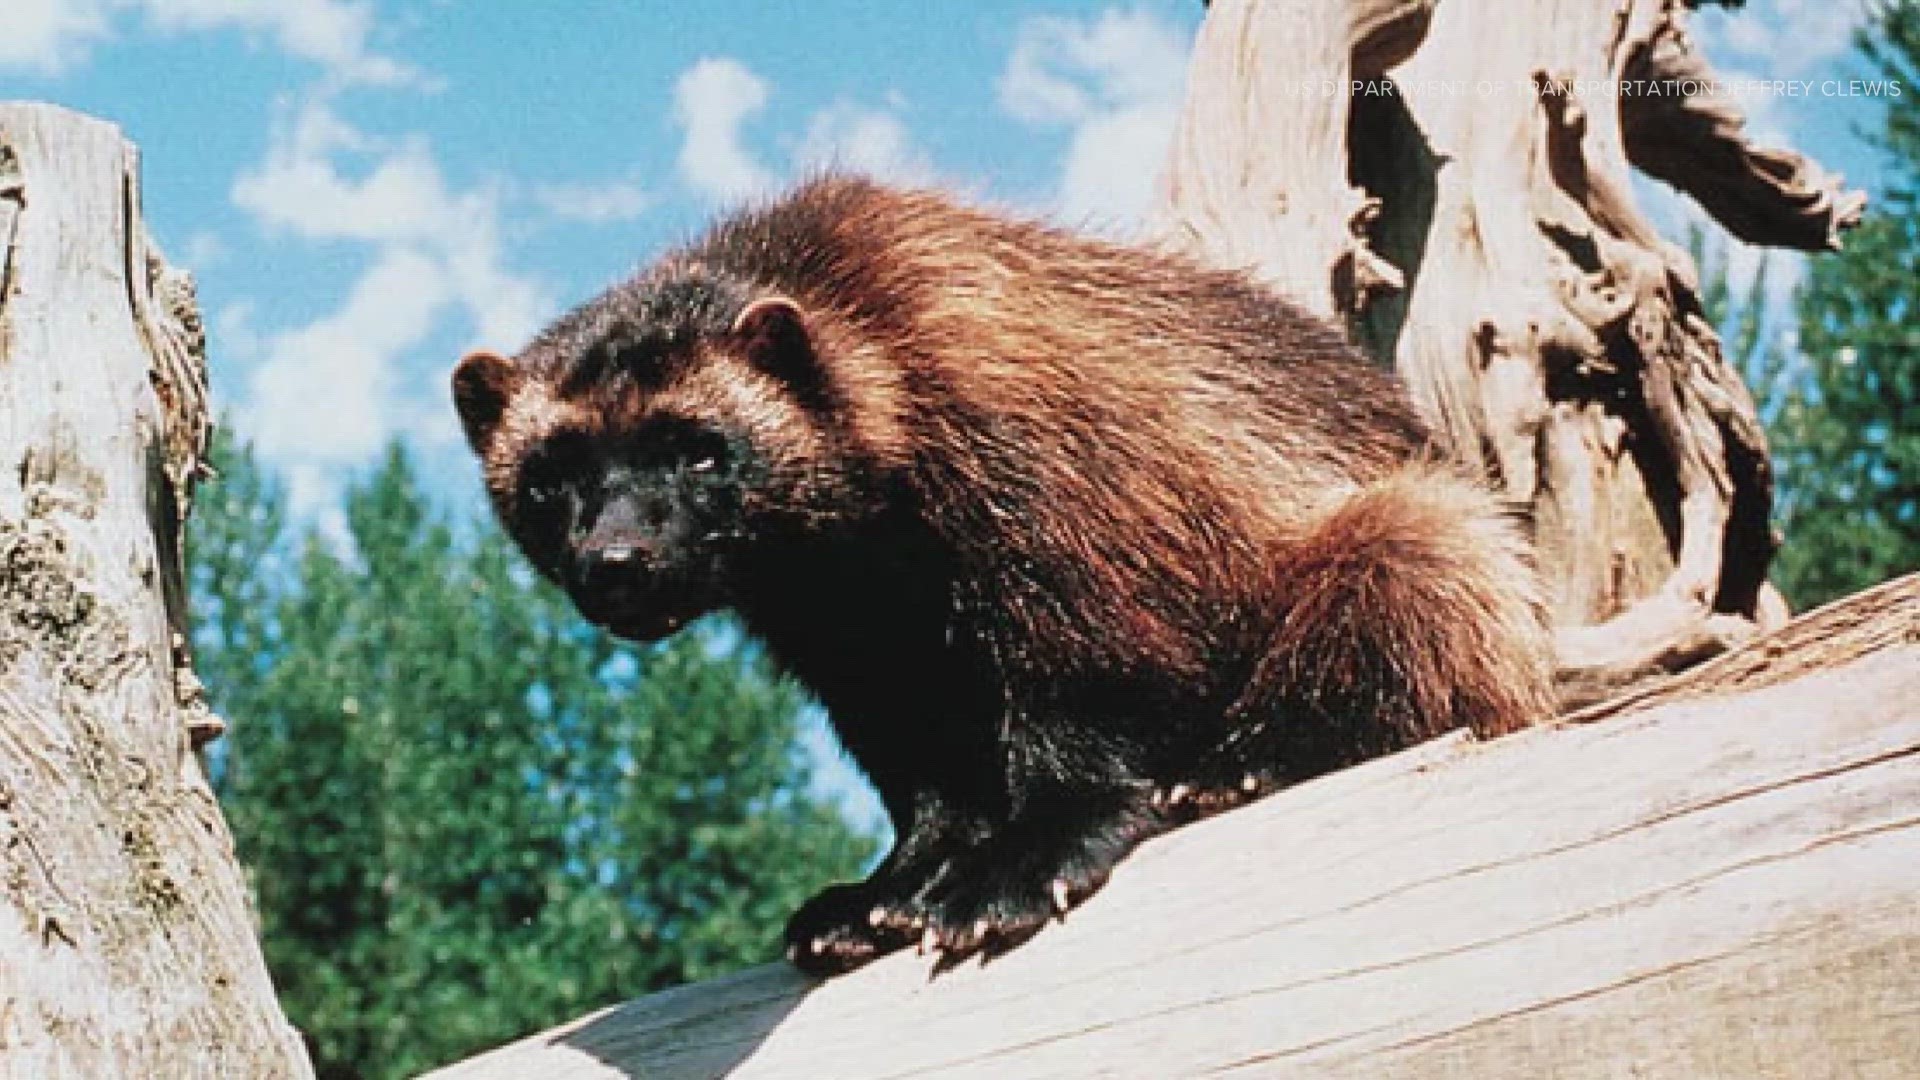 Colorado's wolverine population went extinct in 1900s due to unregulated trapping and poisoning. A new bill in the state legislature aims to reintroduce the species.